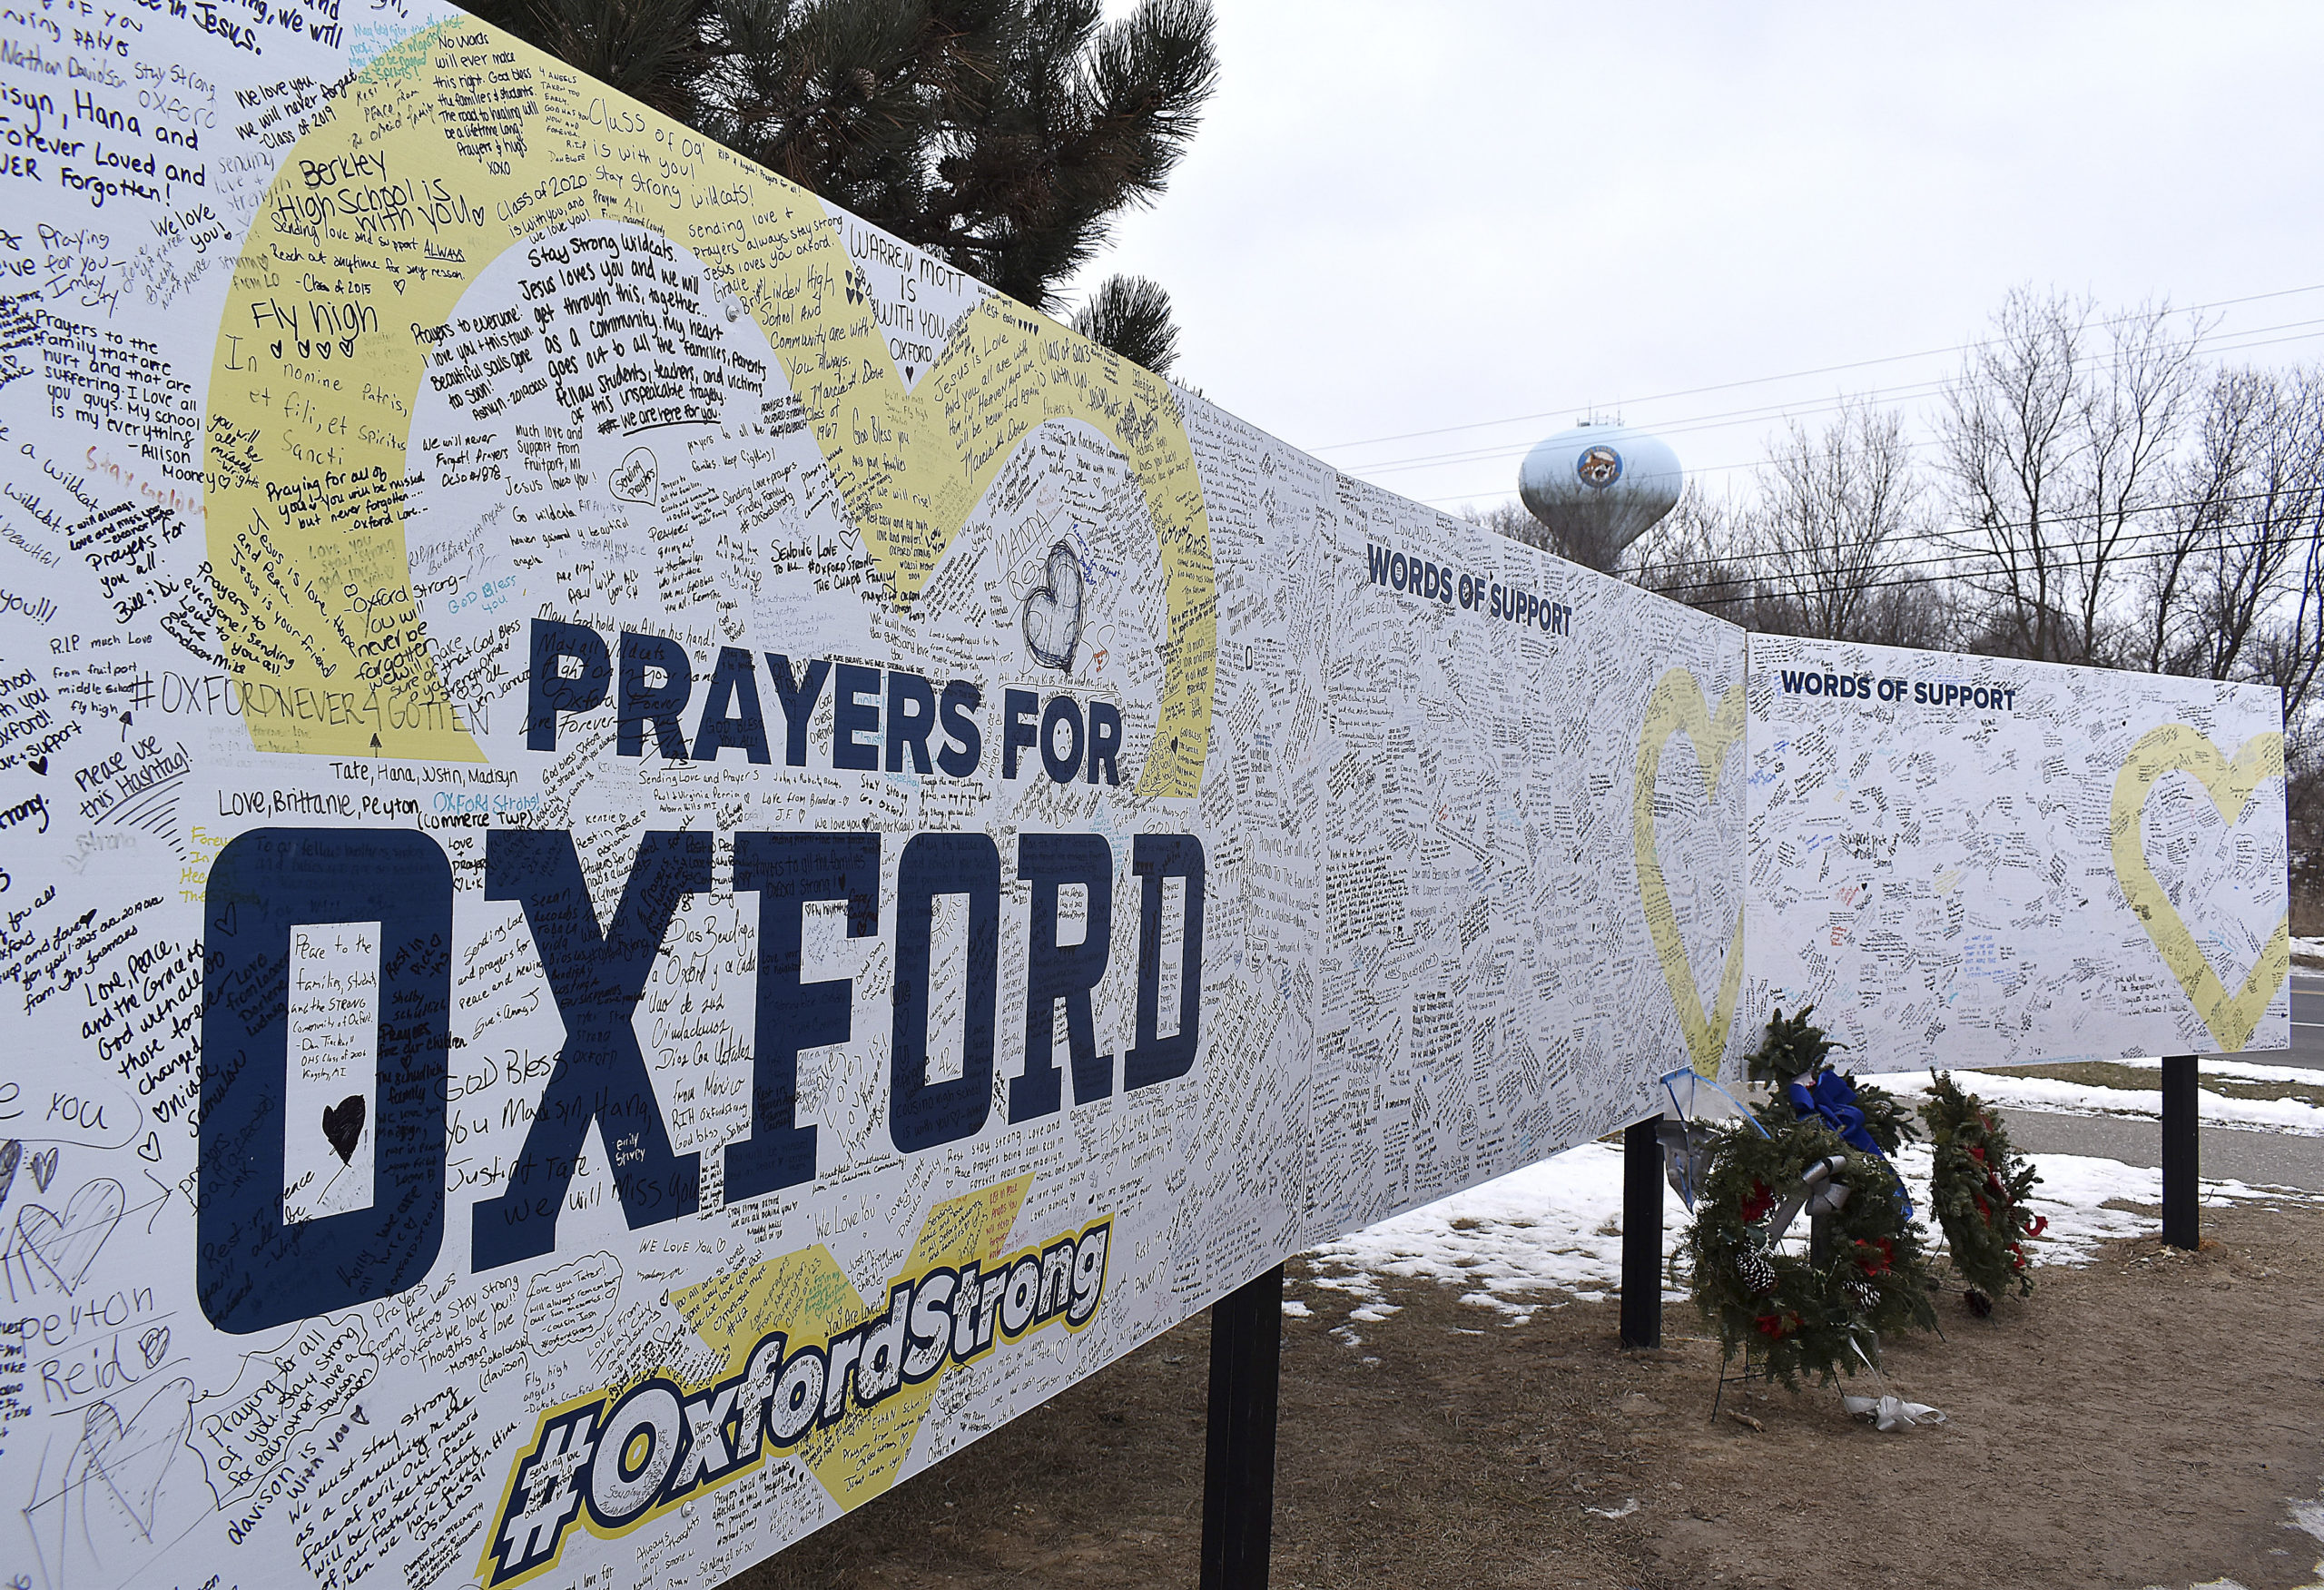 Teachers Describe Responses to Harrowing Attack: ‘This will not be what defines Oxford’